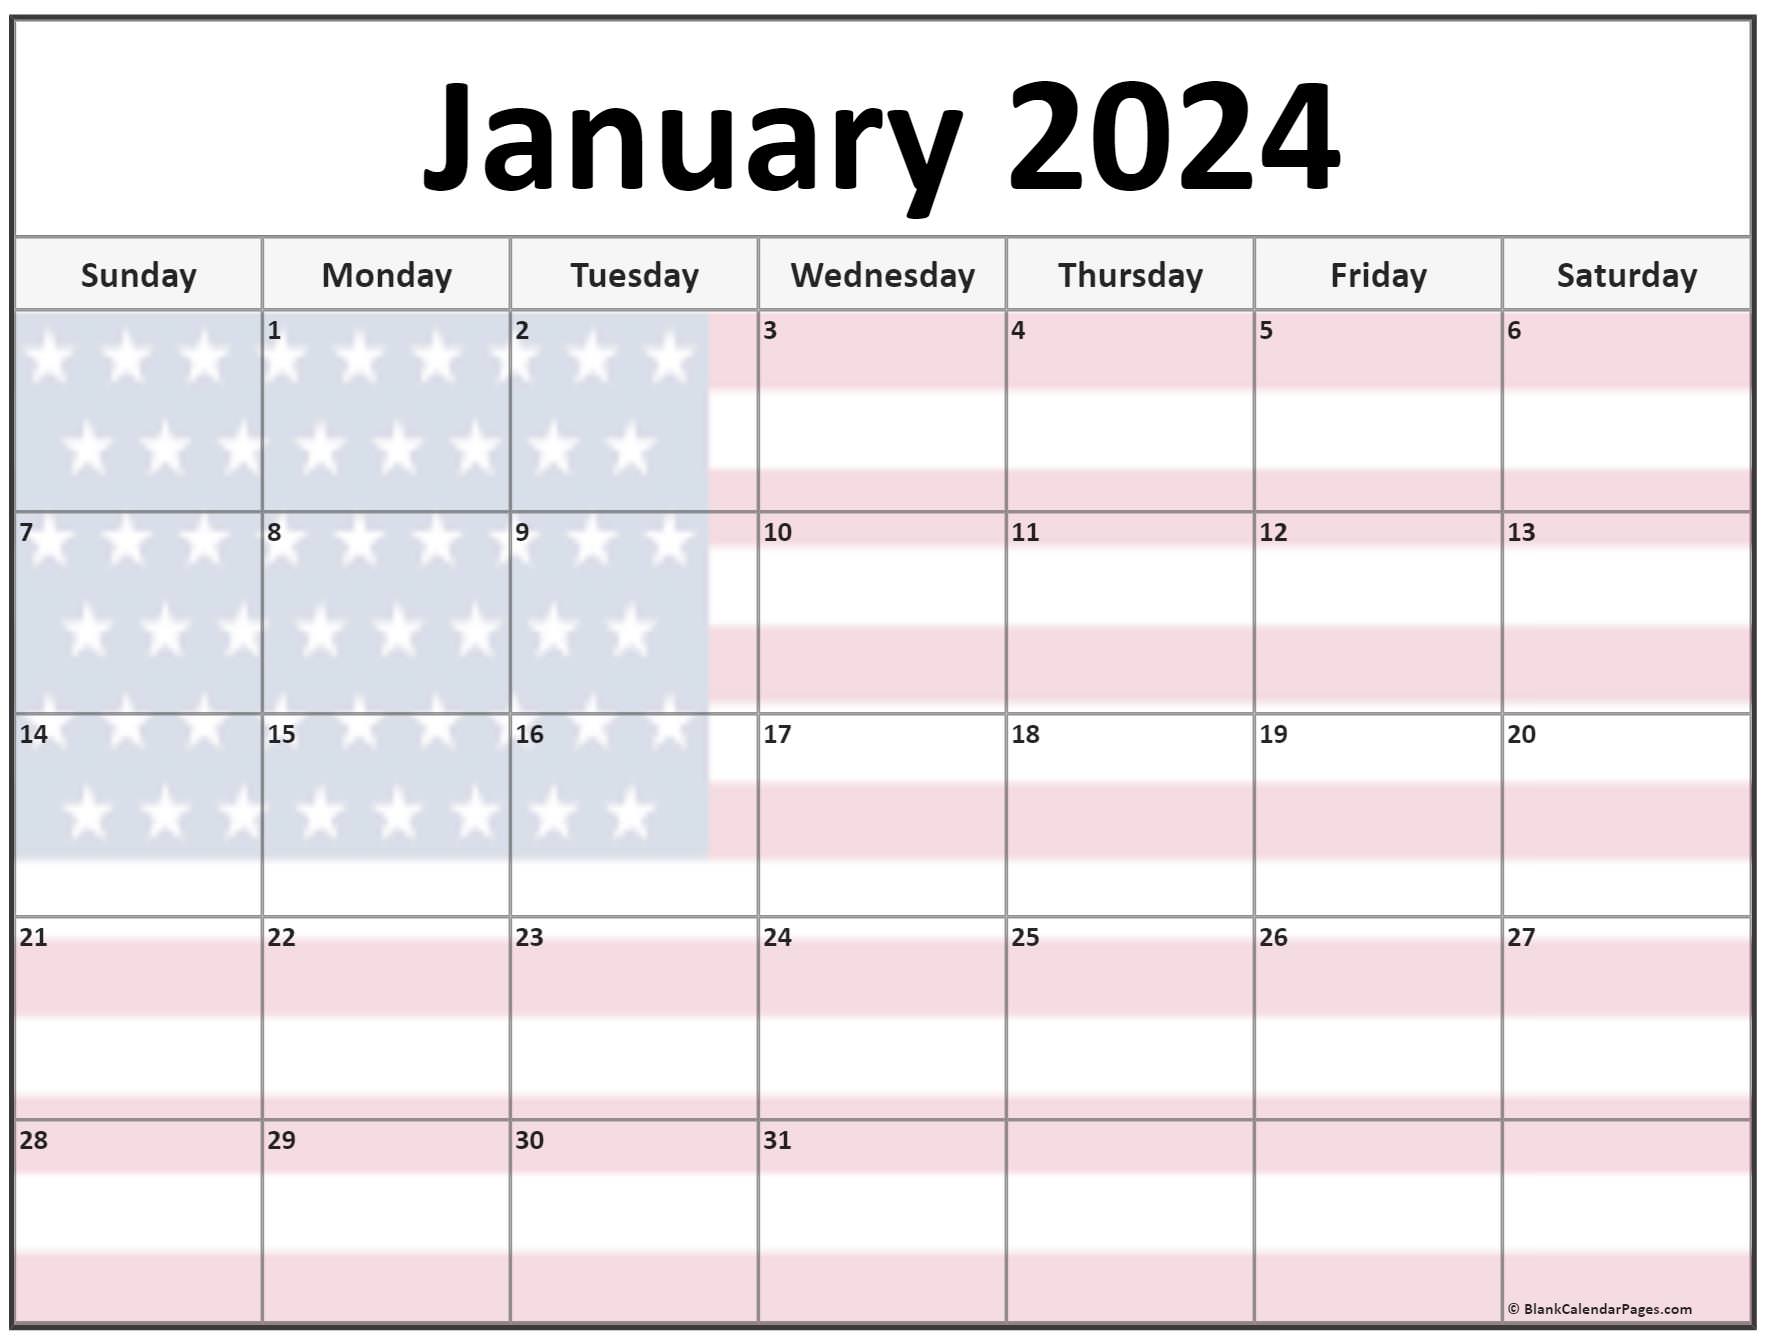 Collection of January 2023 photo calendars with image filters.